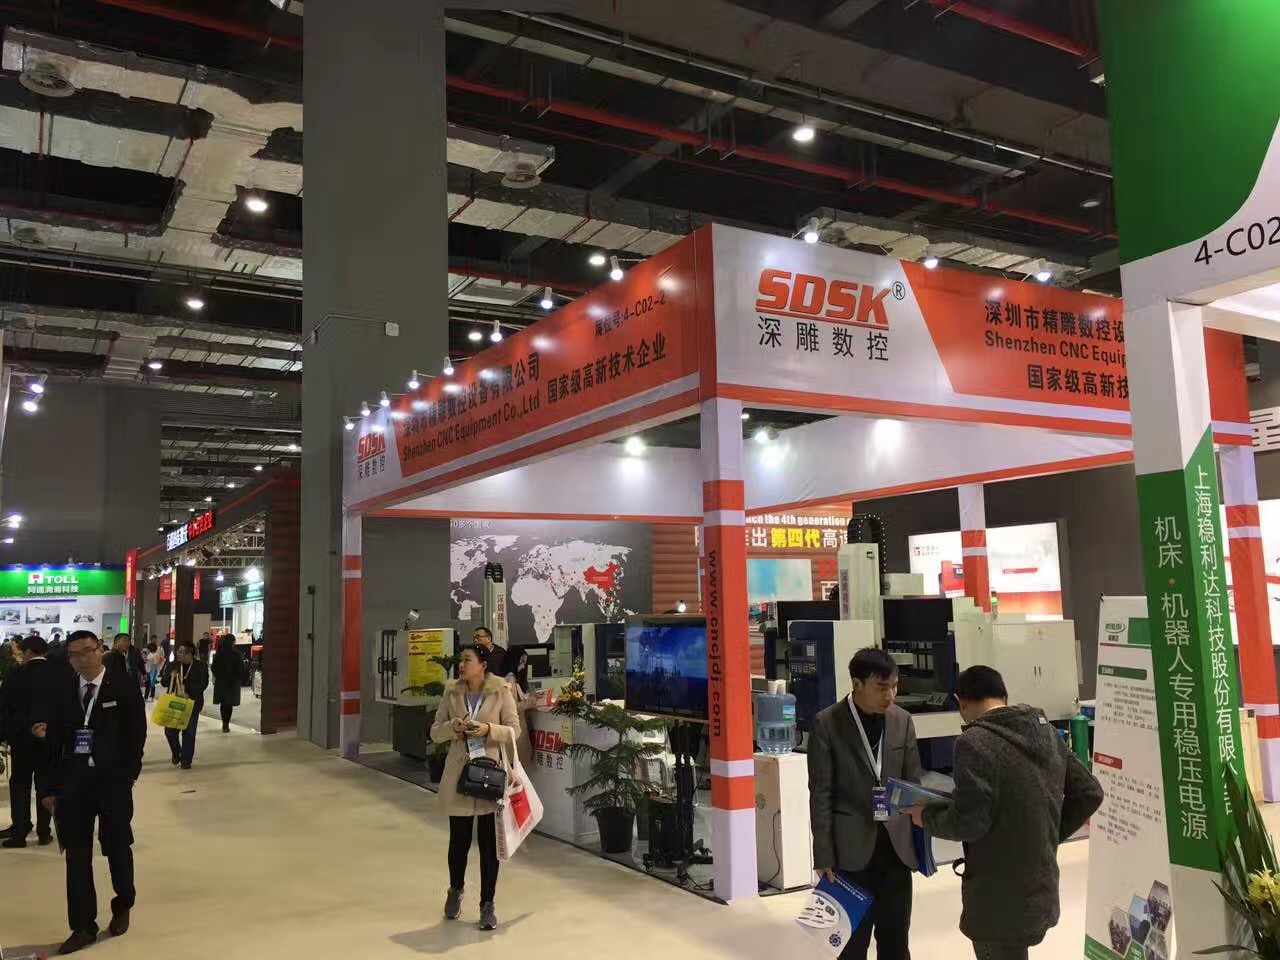 Shenzhen Jingdiao successfully participated in the Shanghai International Machine Tool Exhibition. At the exhibition, the company's main machines, glass carving machines, and large-scale carving machi